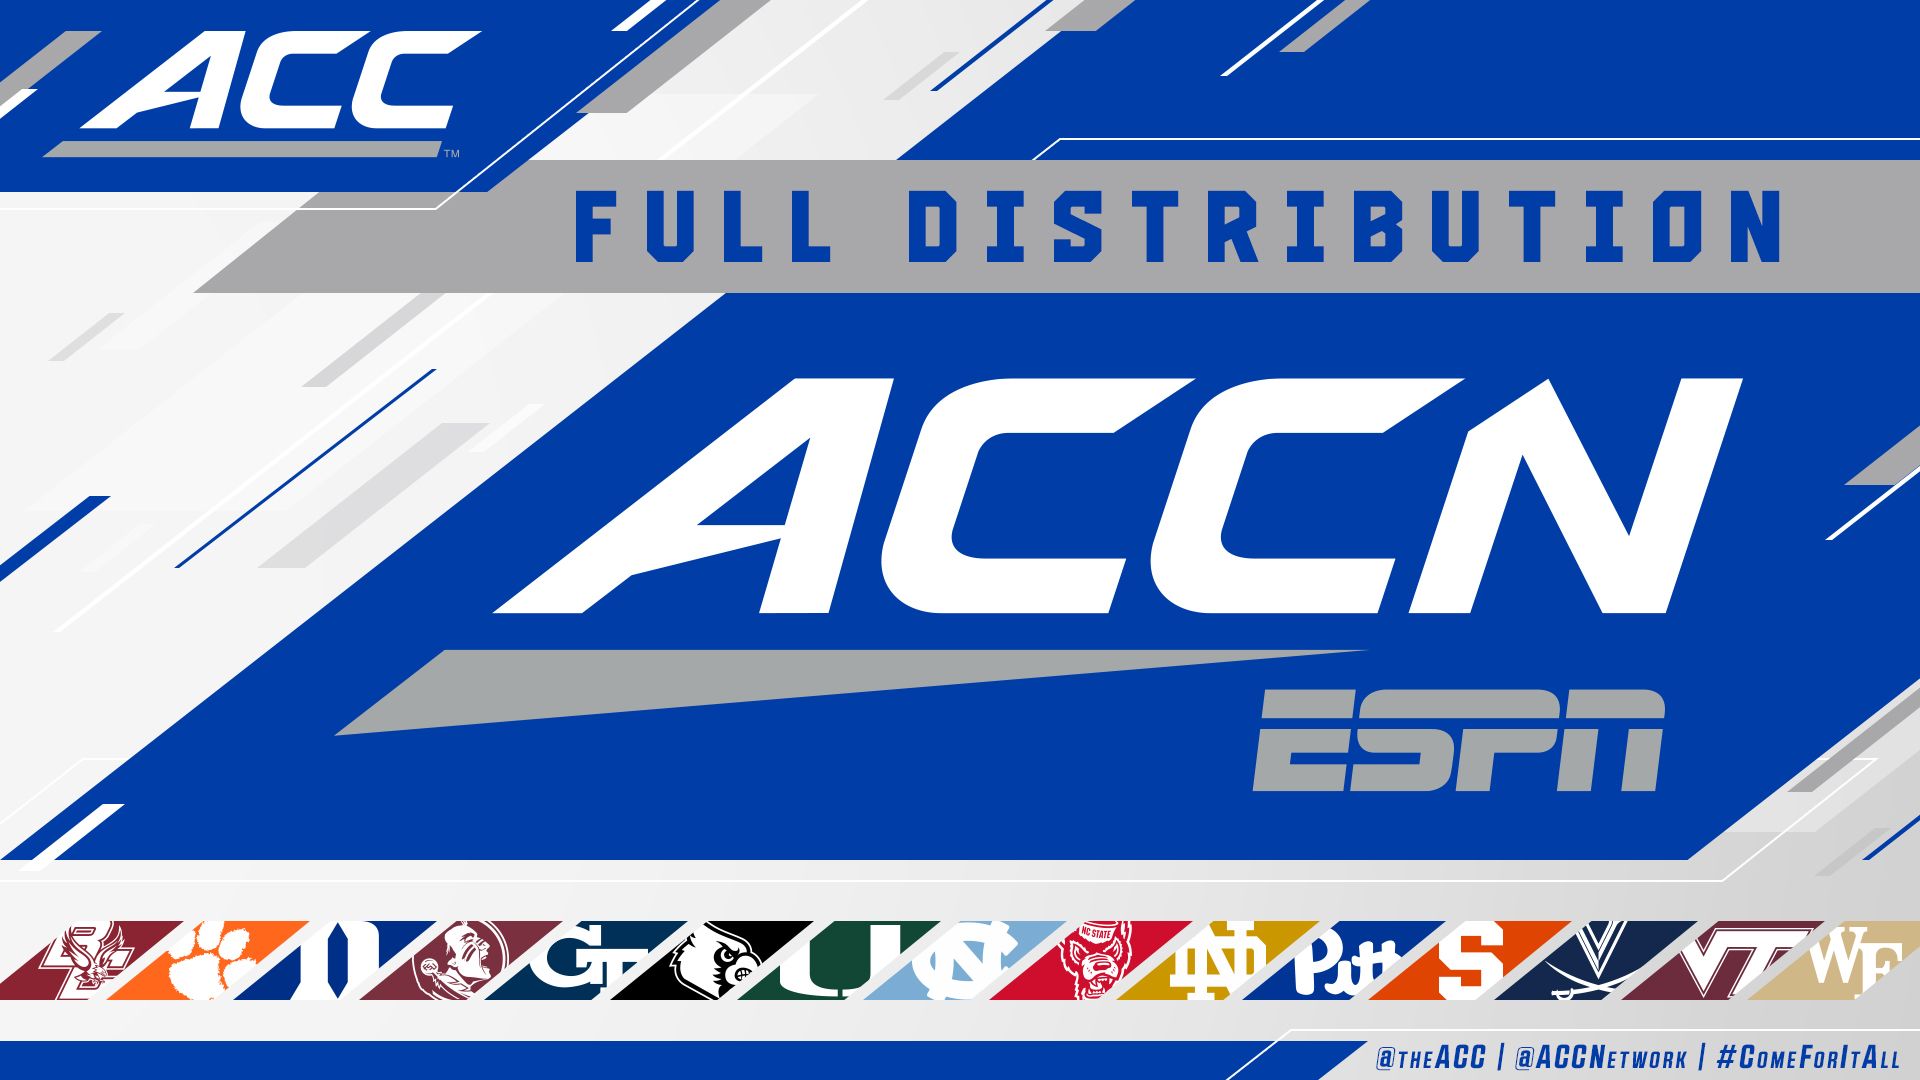 ESPN’s ACC Network to Launch in Comcast’s Xfinity Markets in Coming Weeks